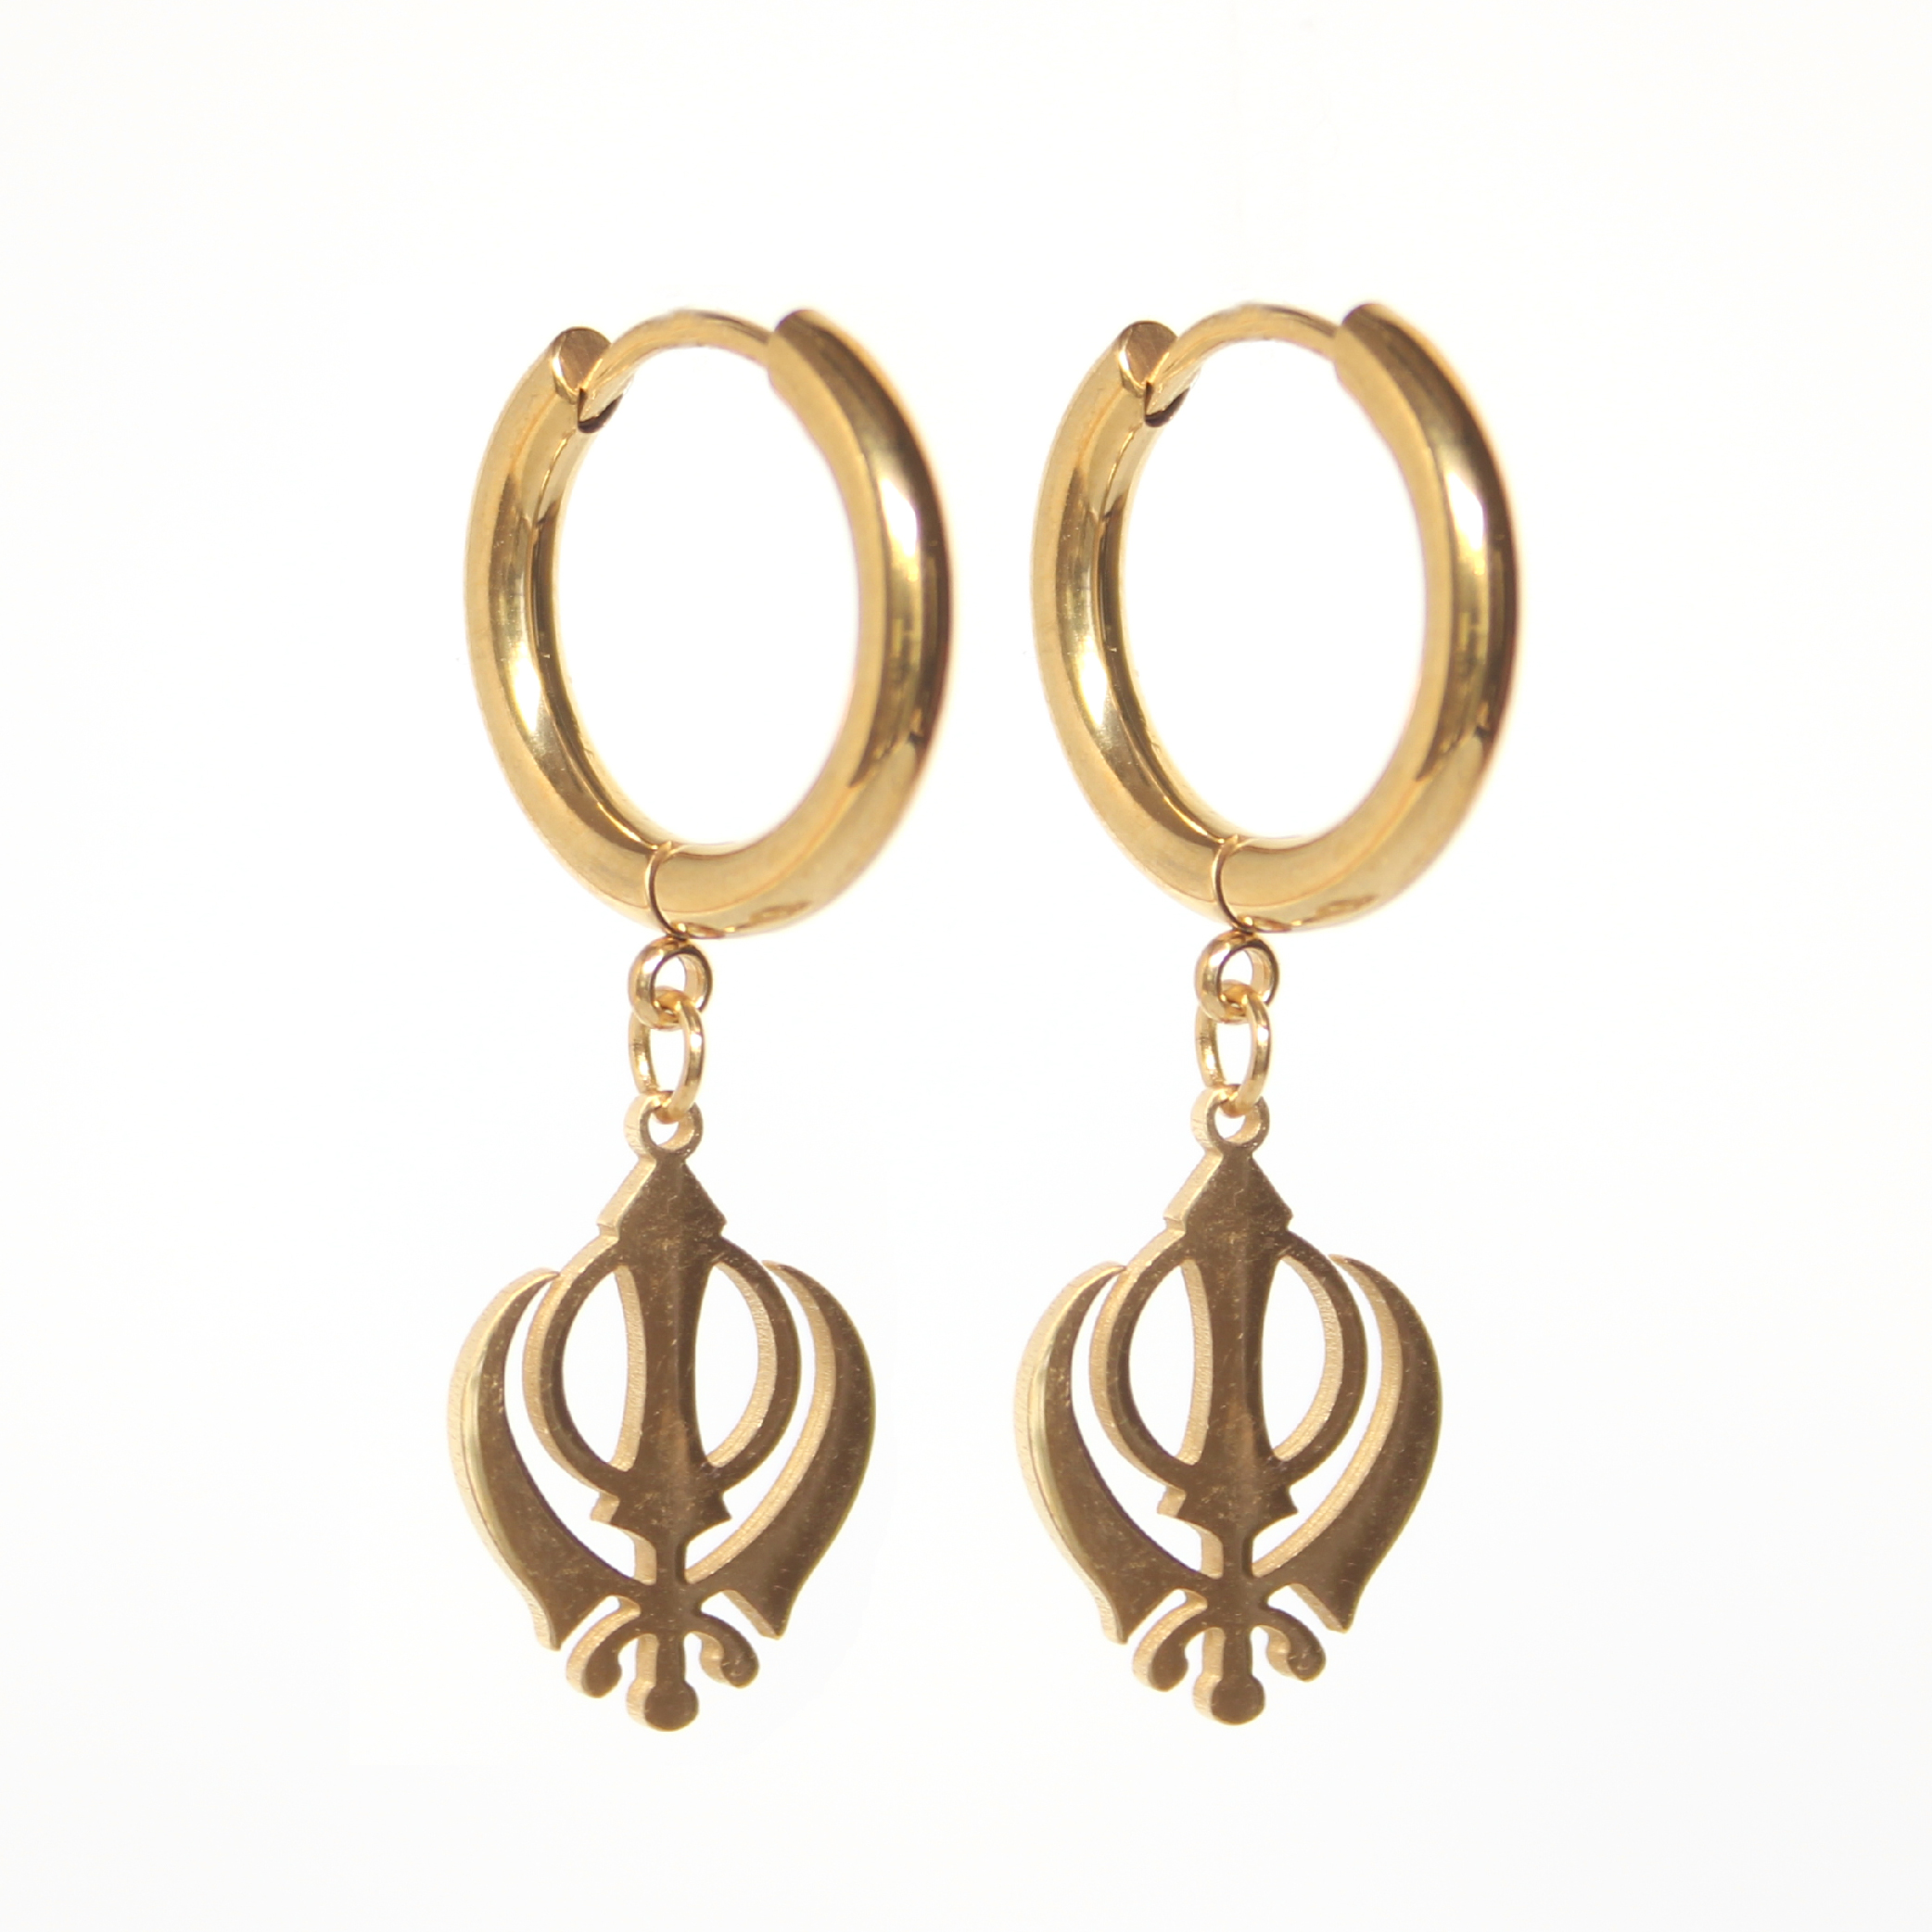 Buy Gold Plated Fashionable Glamorous Golden Color Bali Earrings for Boys  and Men at Amazon.in